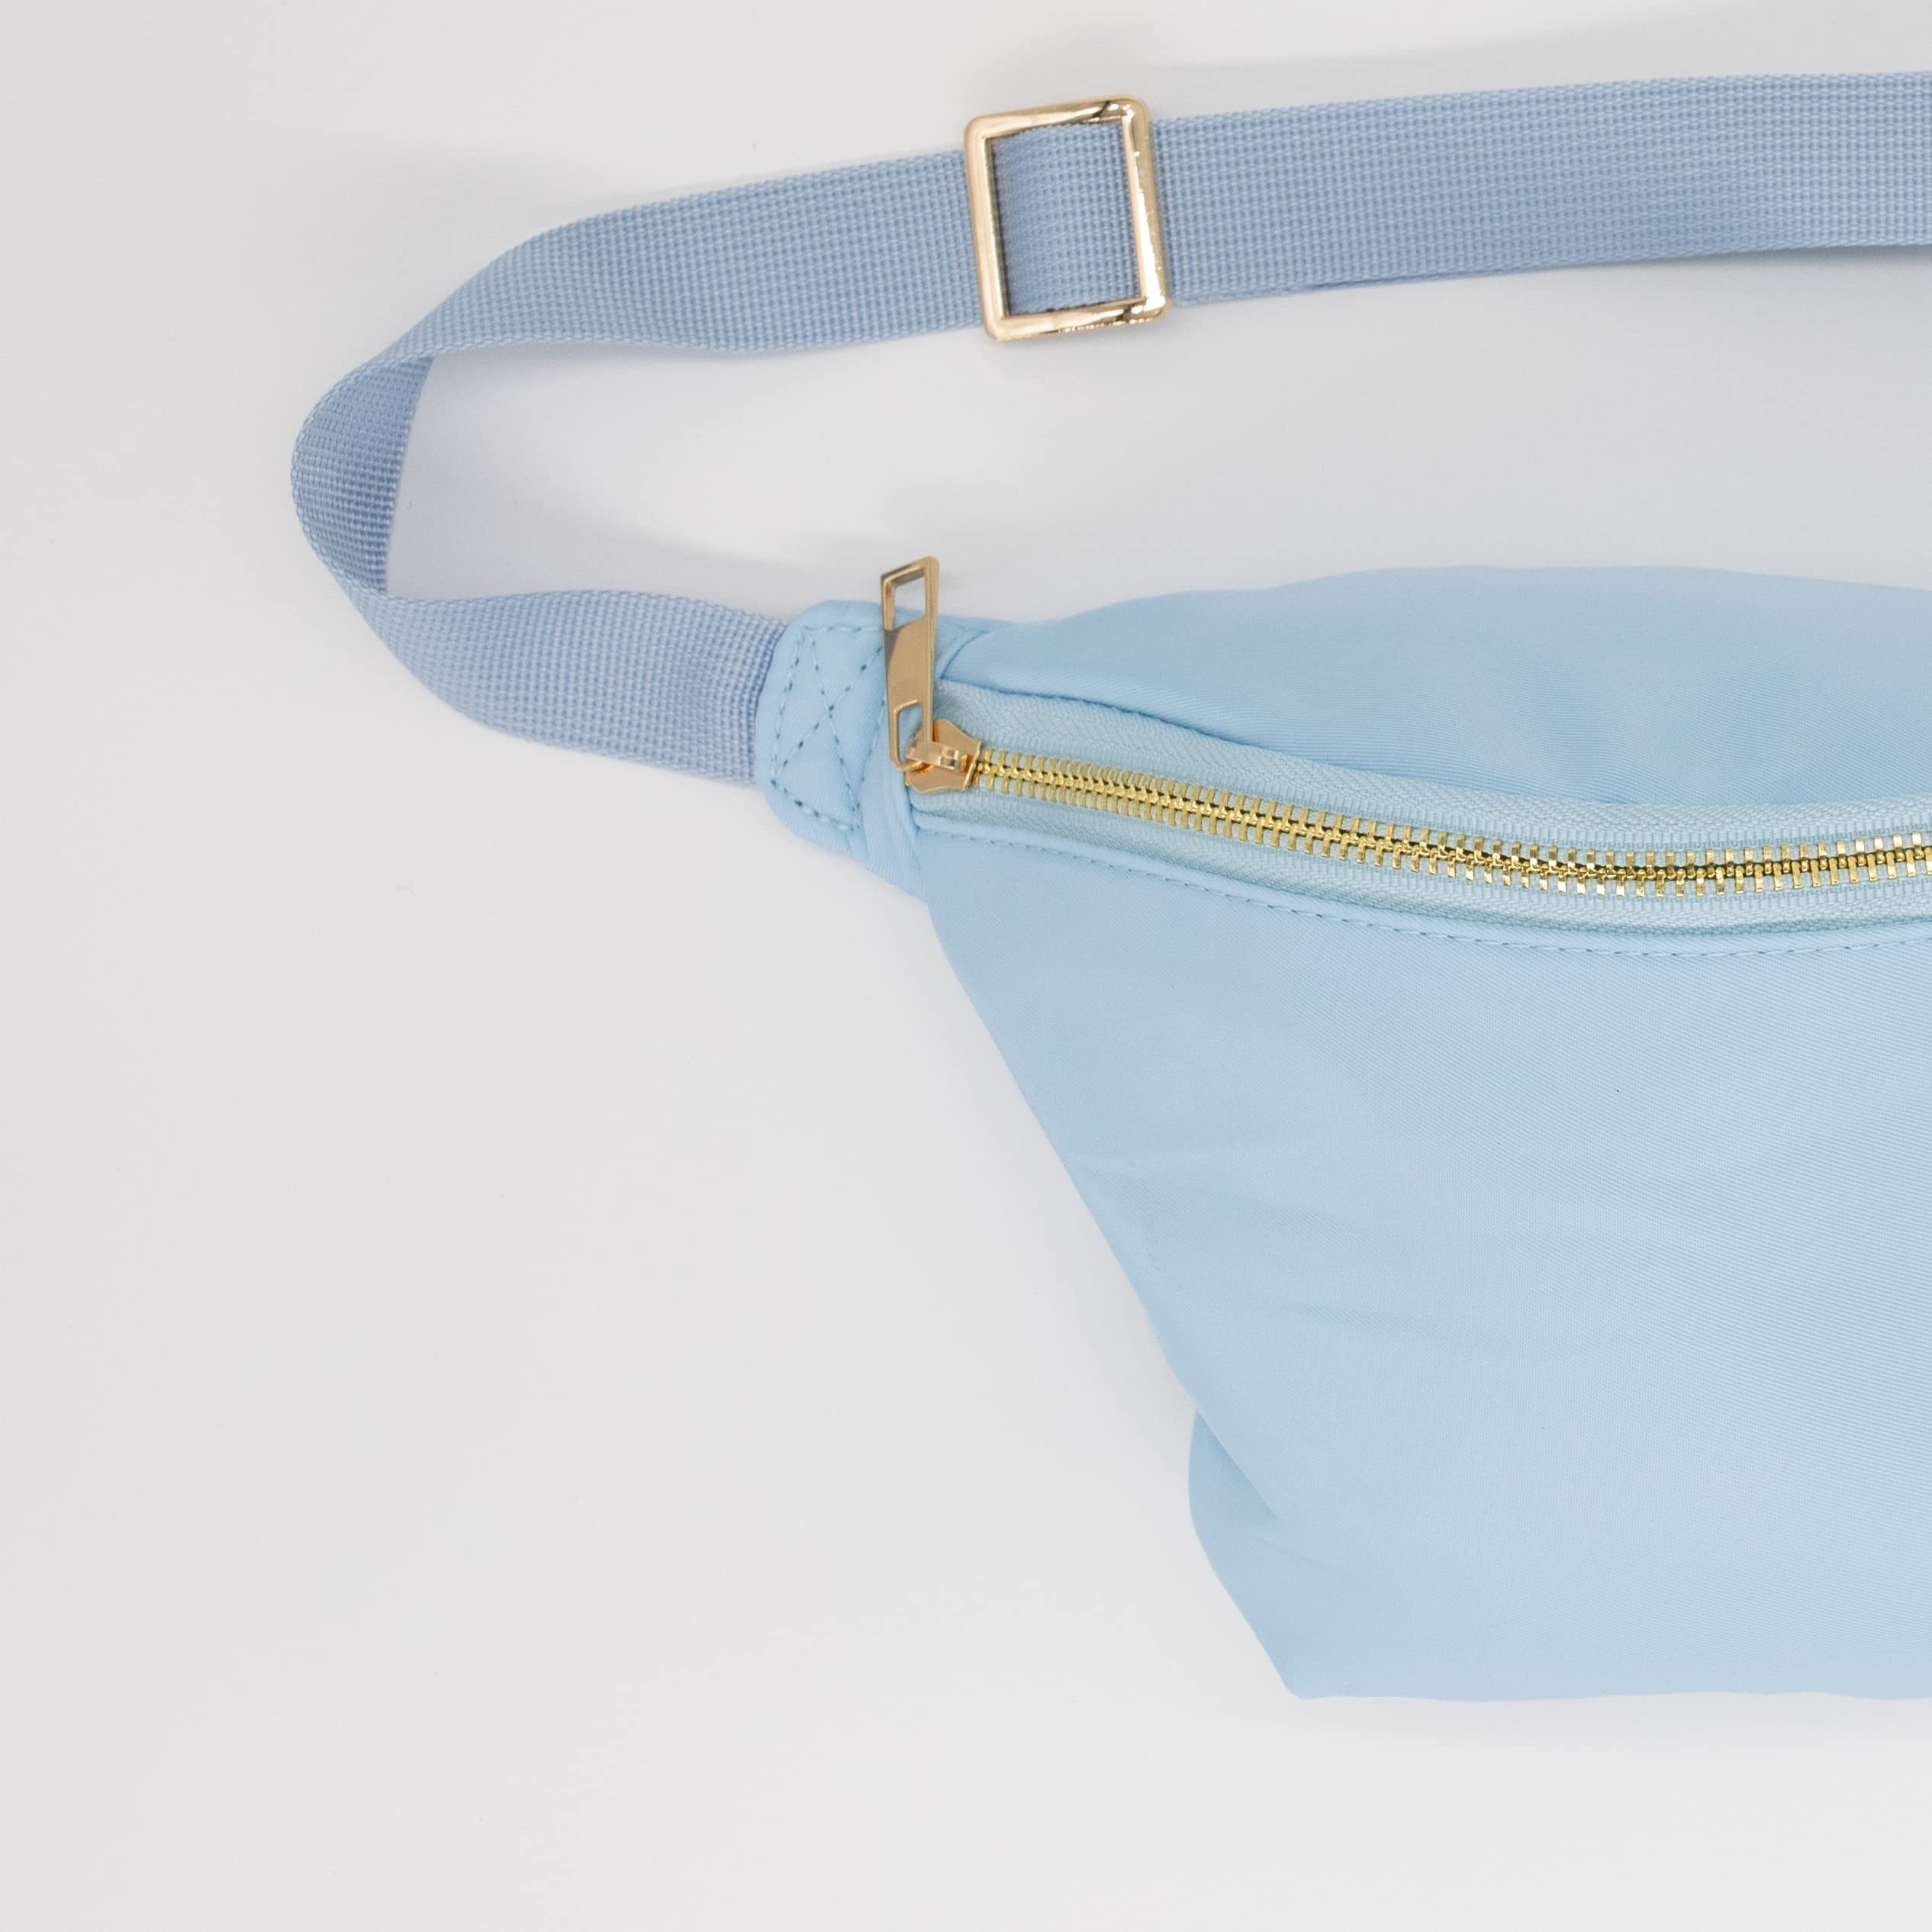 Phlox Collective Nylon Fanny Pack, Fashion Waist Pack Bag, Adjustable Fanny Bag, for Women, Men, and Kids (Ice Blue)